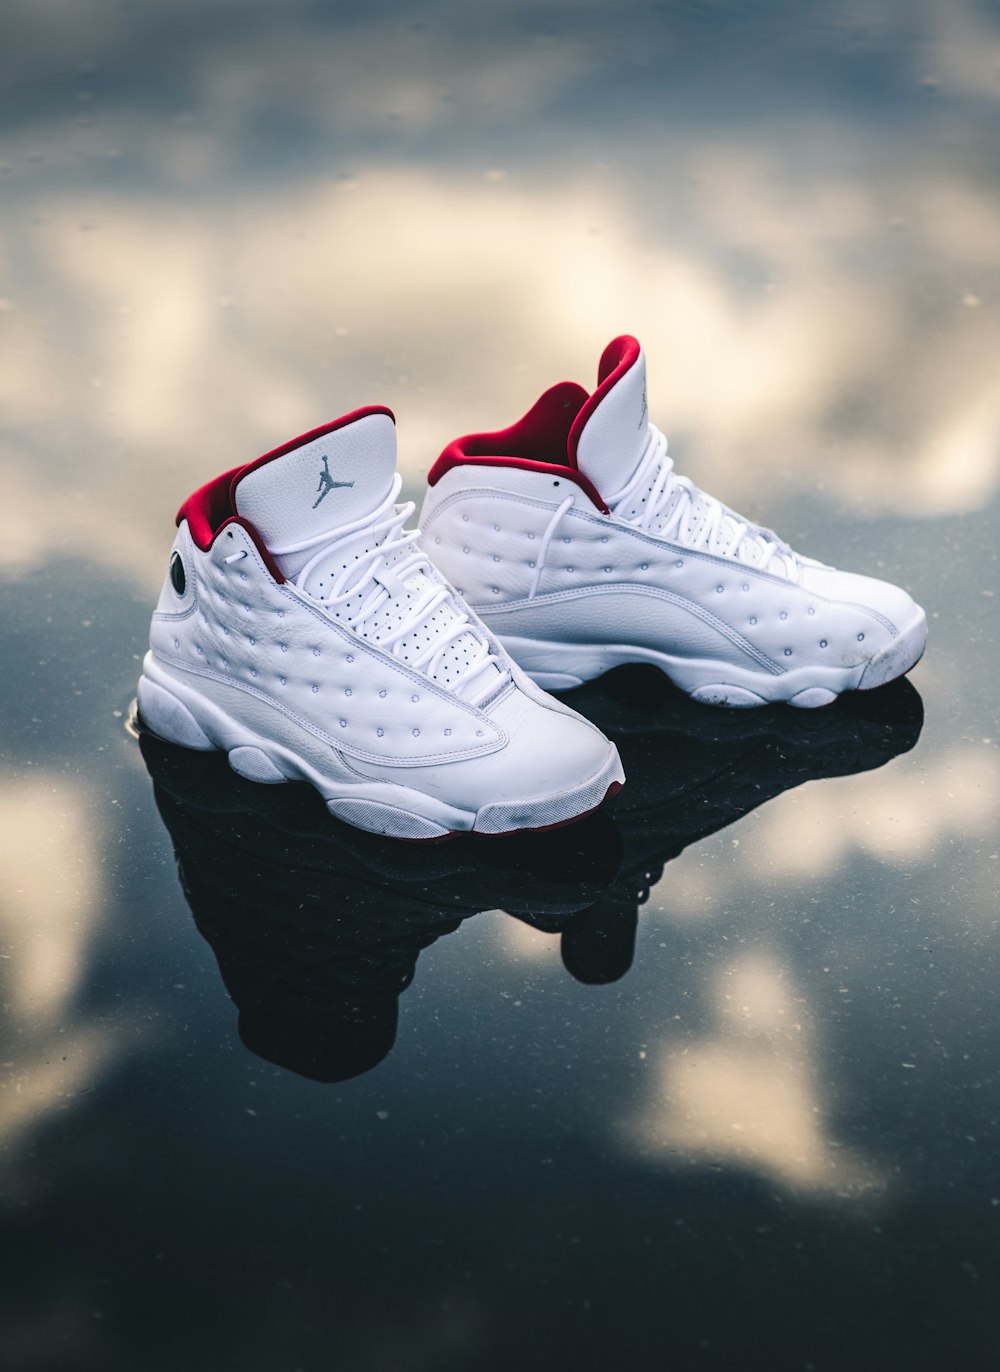 white-and-red Air Jordan 13's photo – Free Sneaker Image on Unsplash